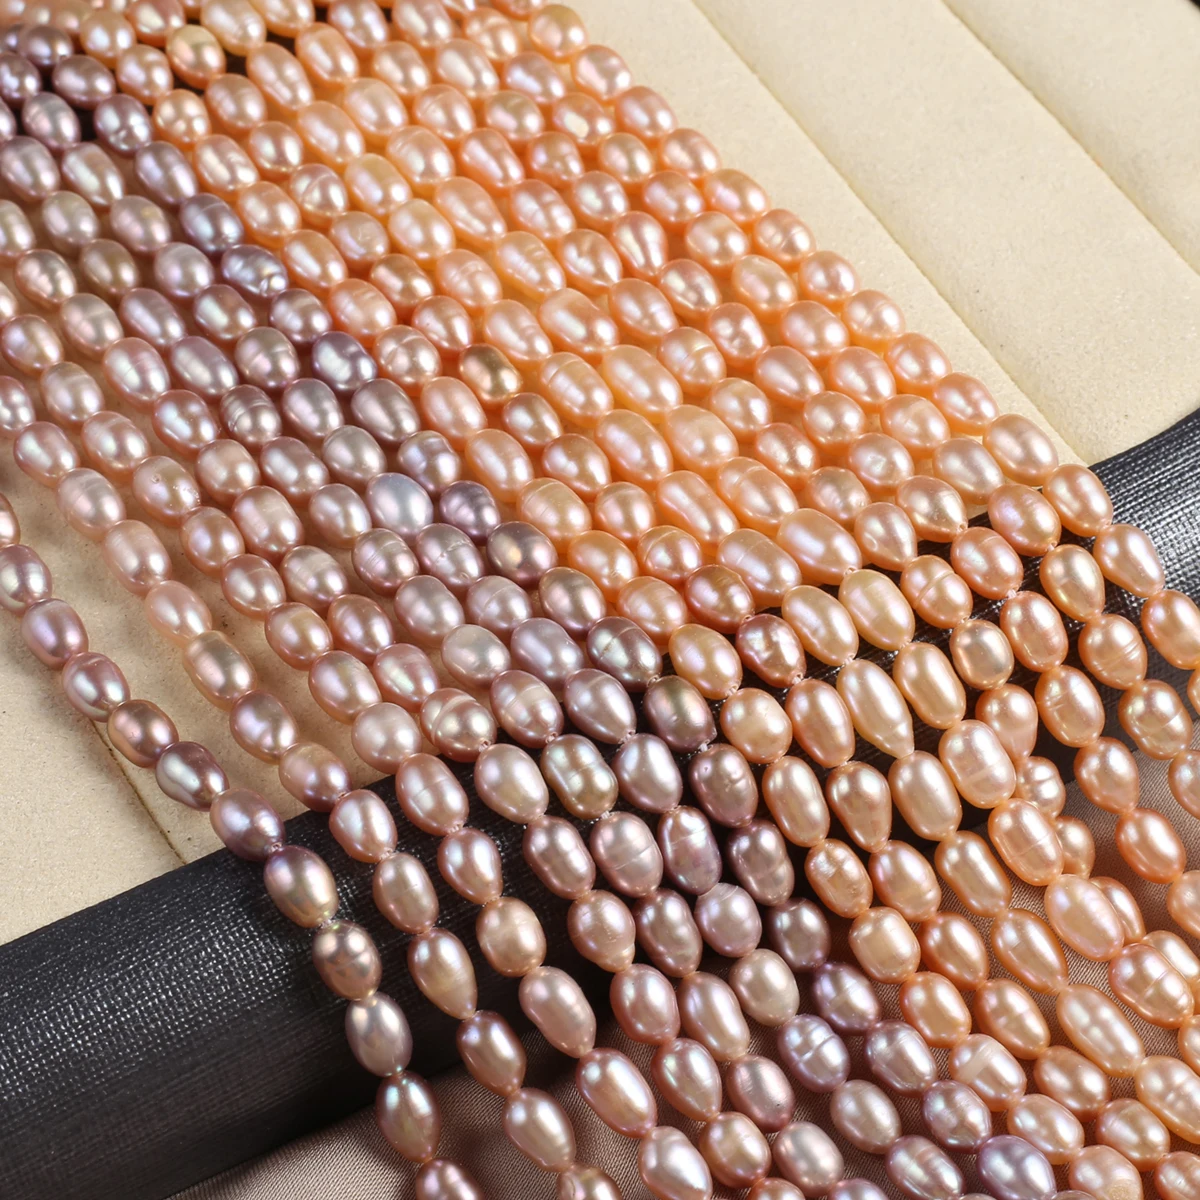 

Natural Pearl Rice Shaped Beads Exquisite Shape Elegant Appearance for DIY Jewelry Making Handmade Bracelet Necklace Length 36cm